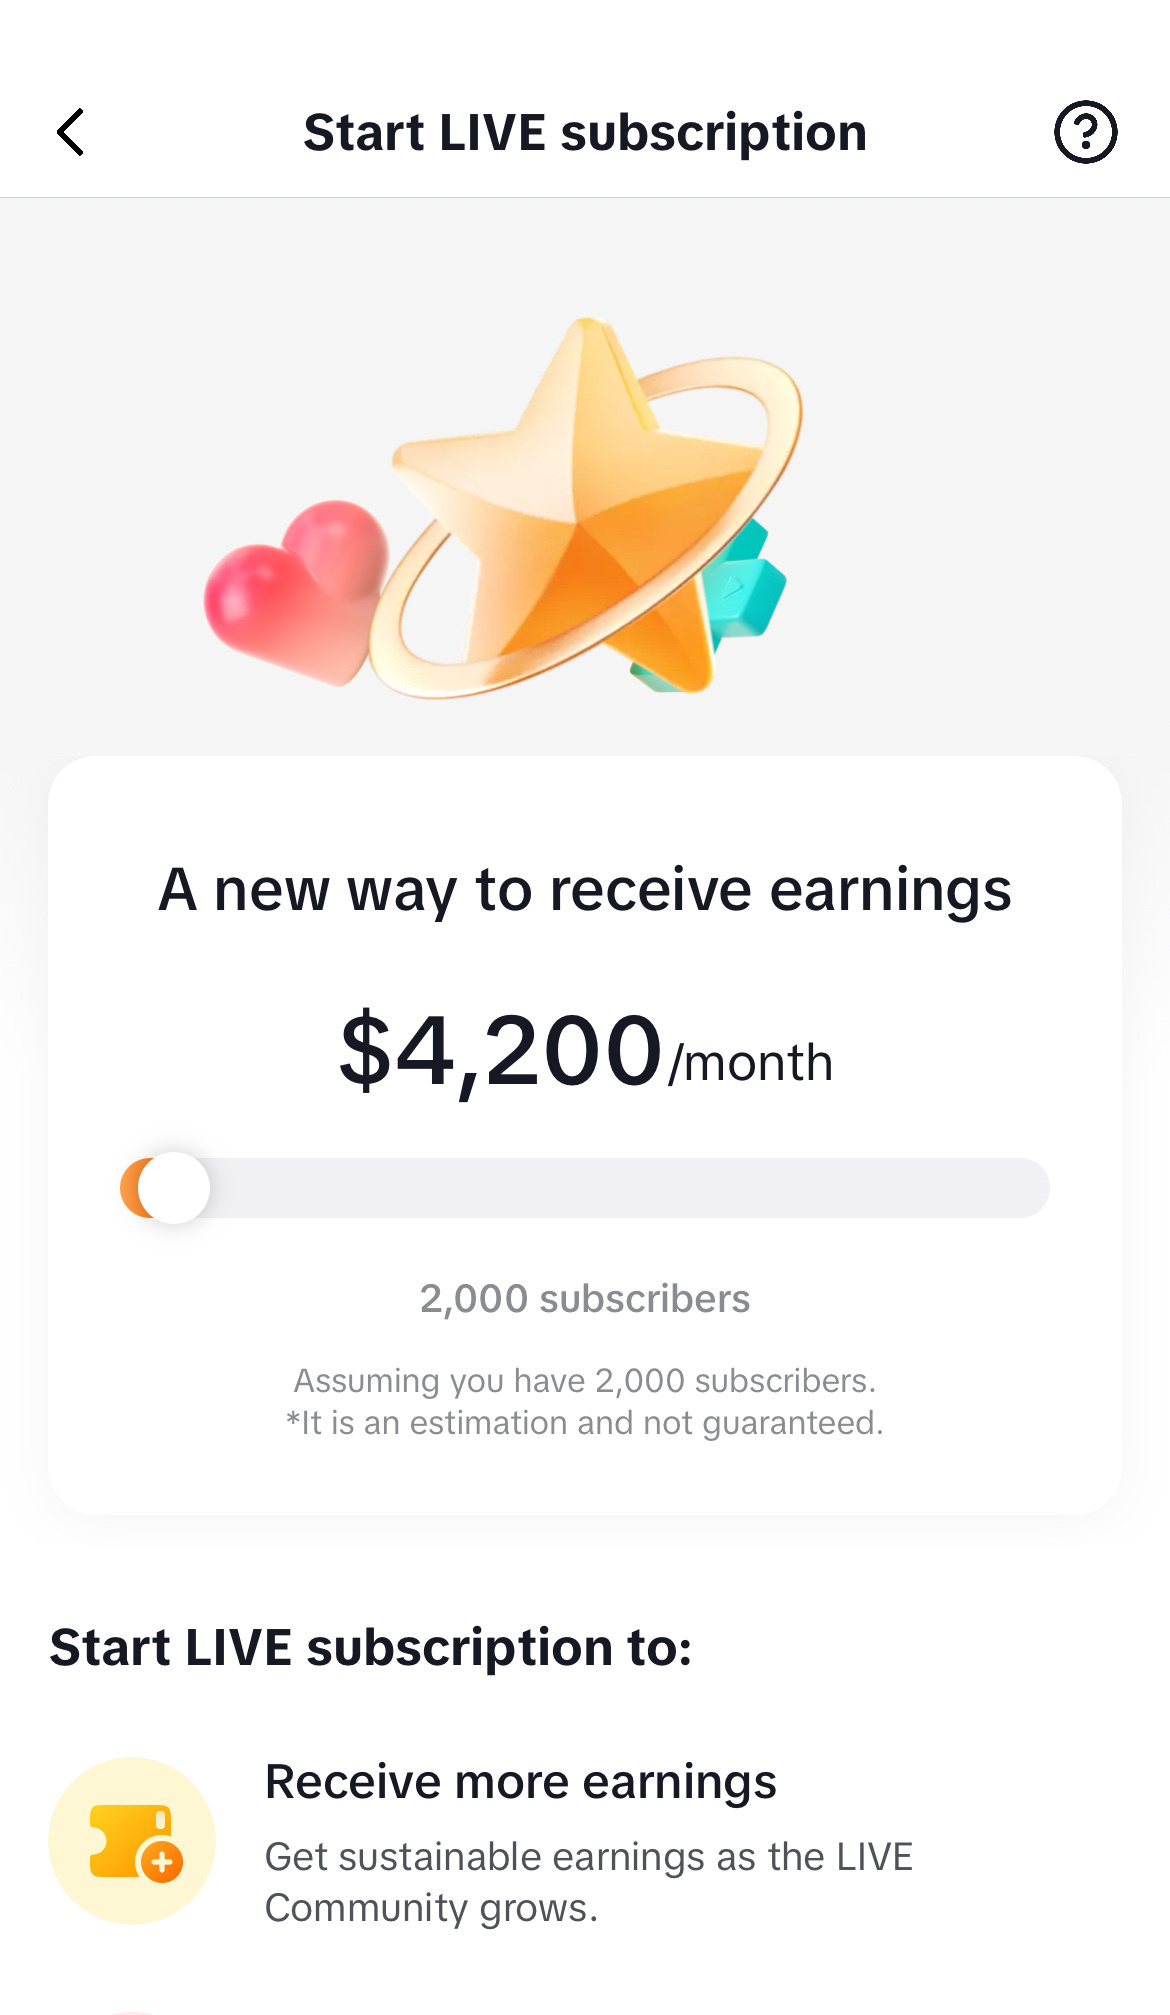 Tiktok saying if you have 2,000 subscribers you’ll get $4,200 a month 